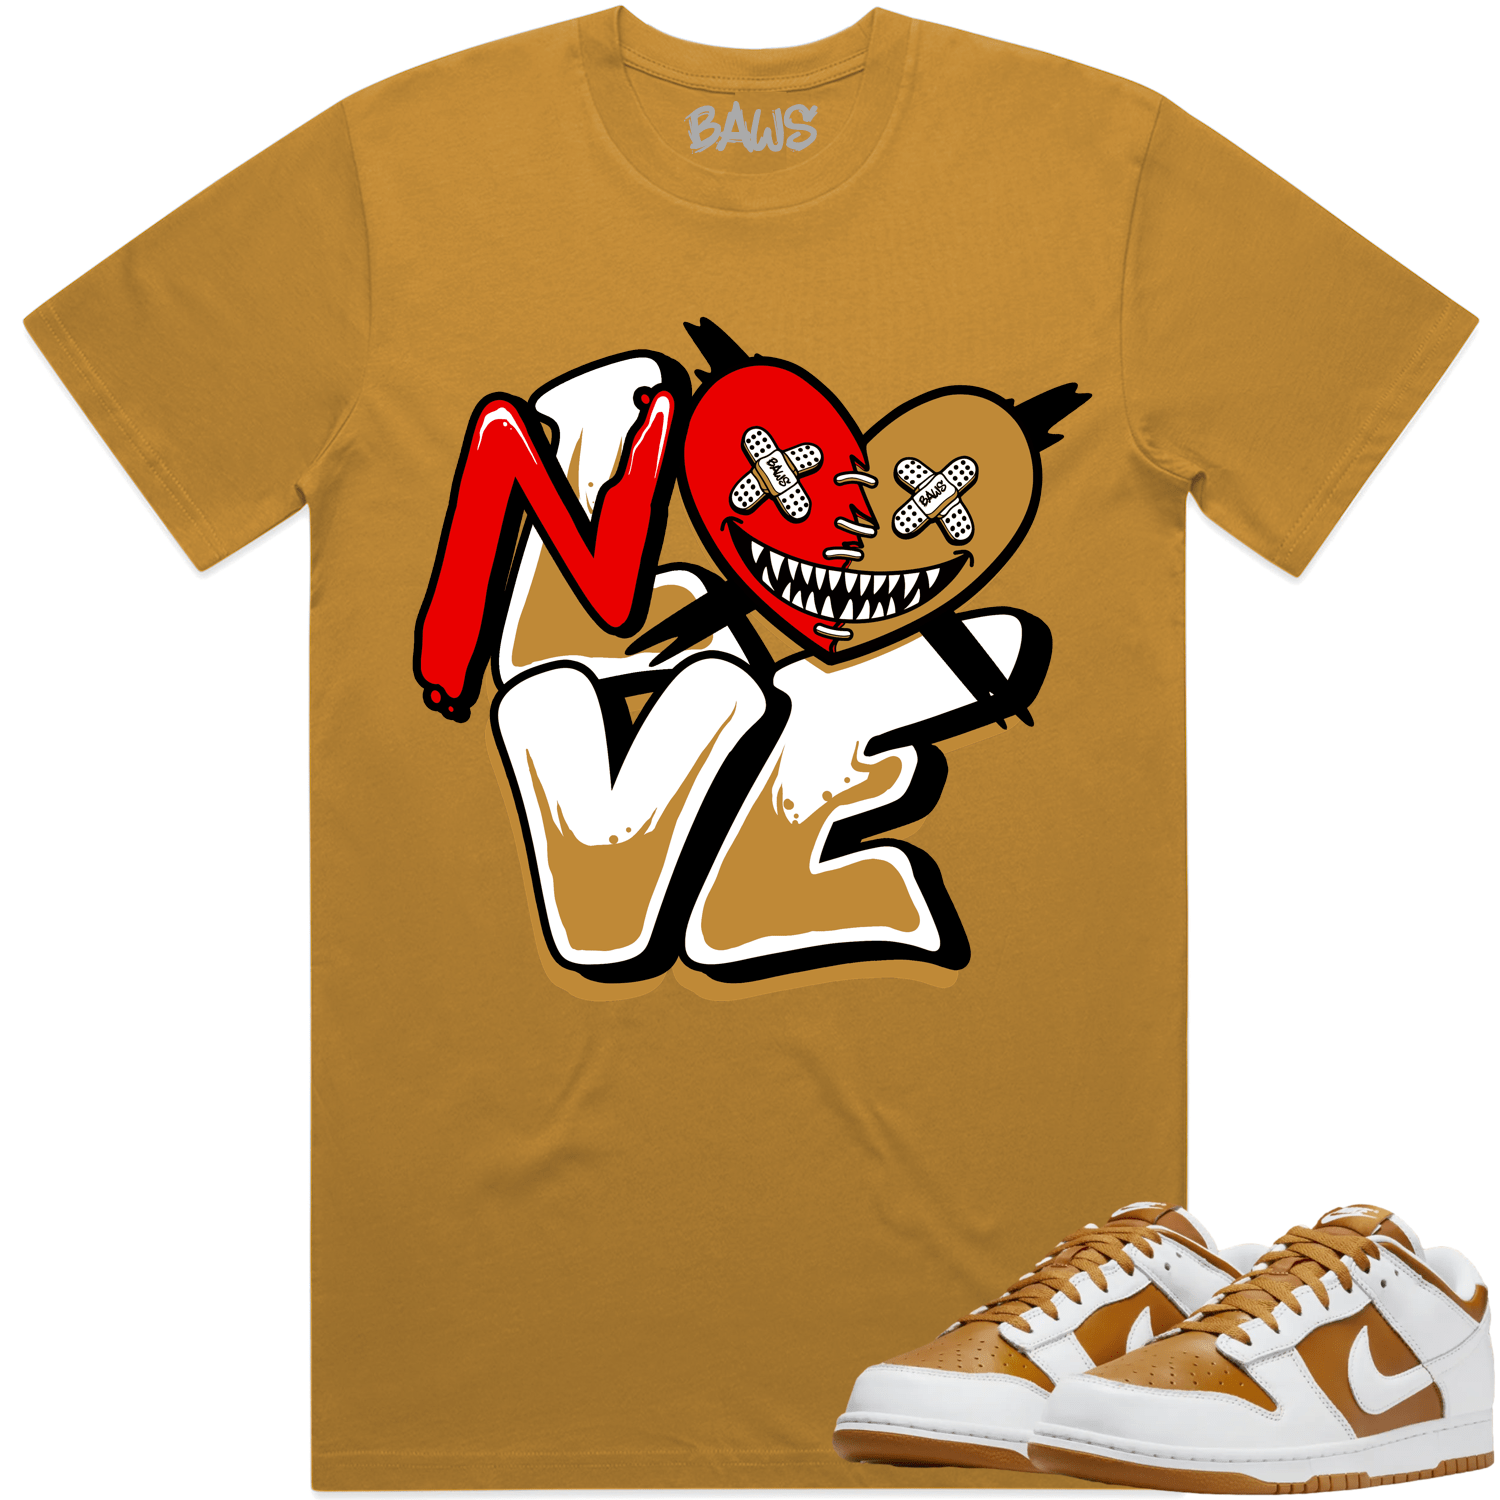 Curry Dunks Shirt - Curry Dunks Sneaker Tees - No Love Baws